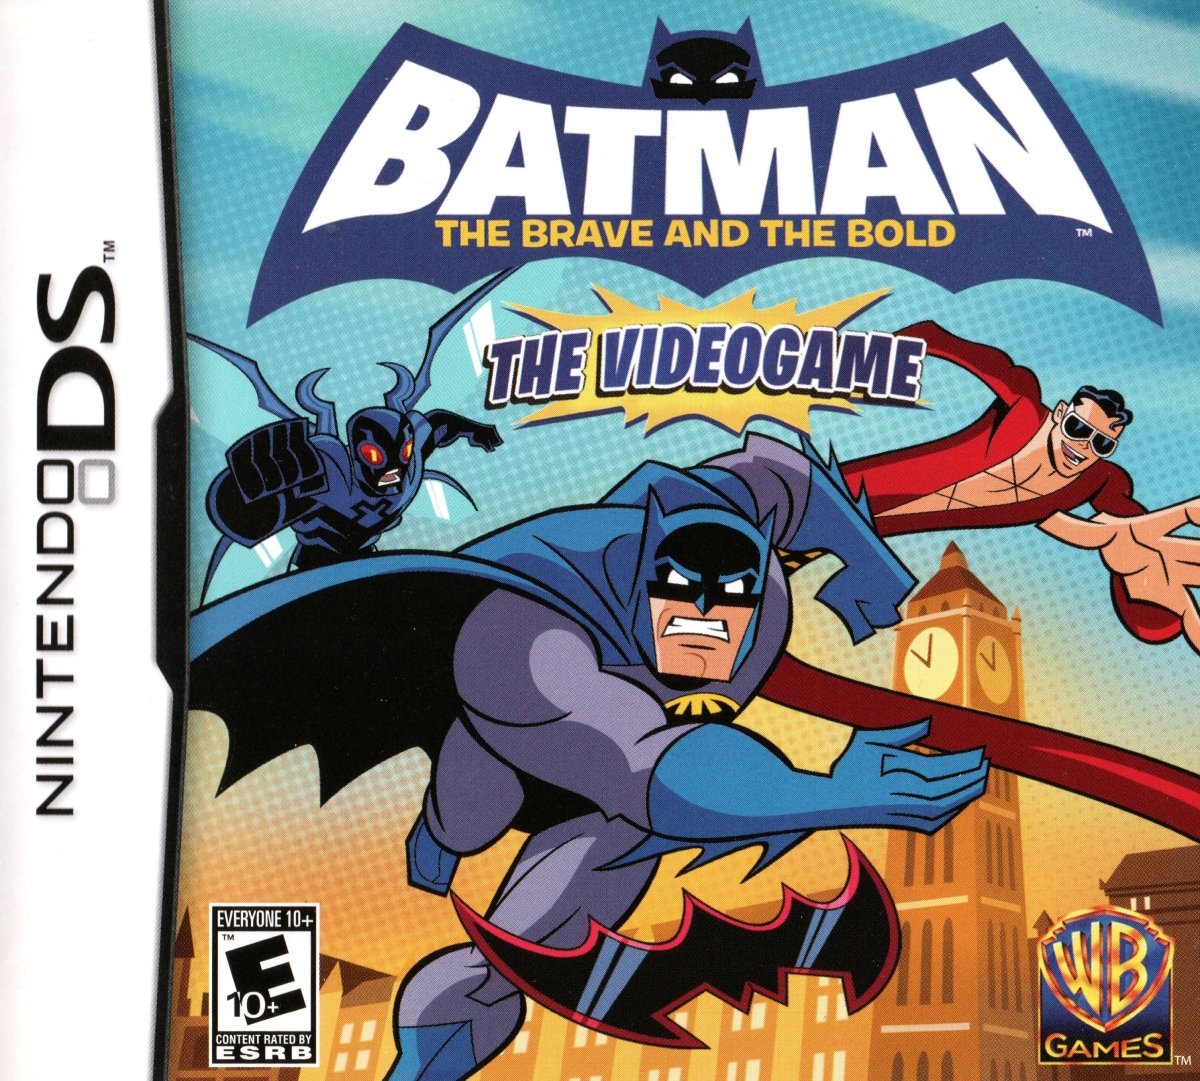 Batman: The Brave and the Bold - Nintendo DS - Retro Island Gaming